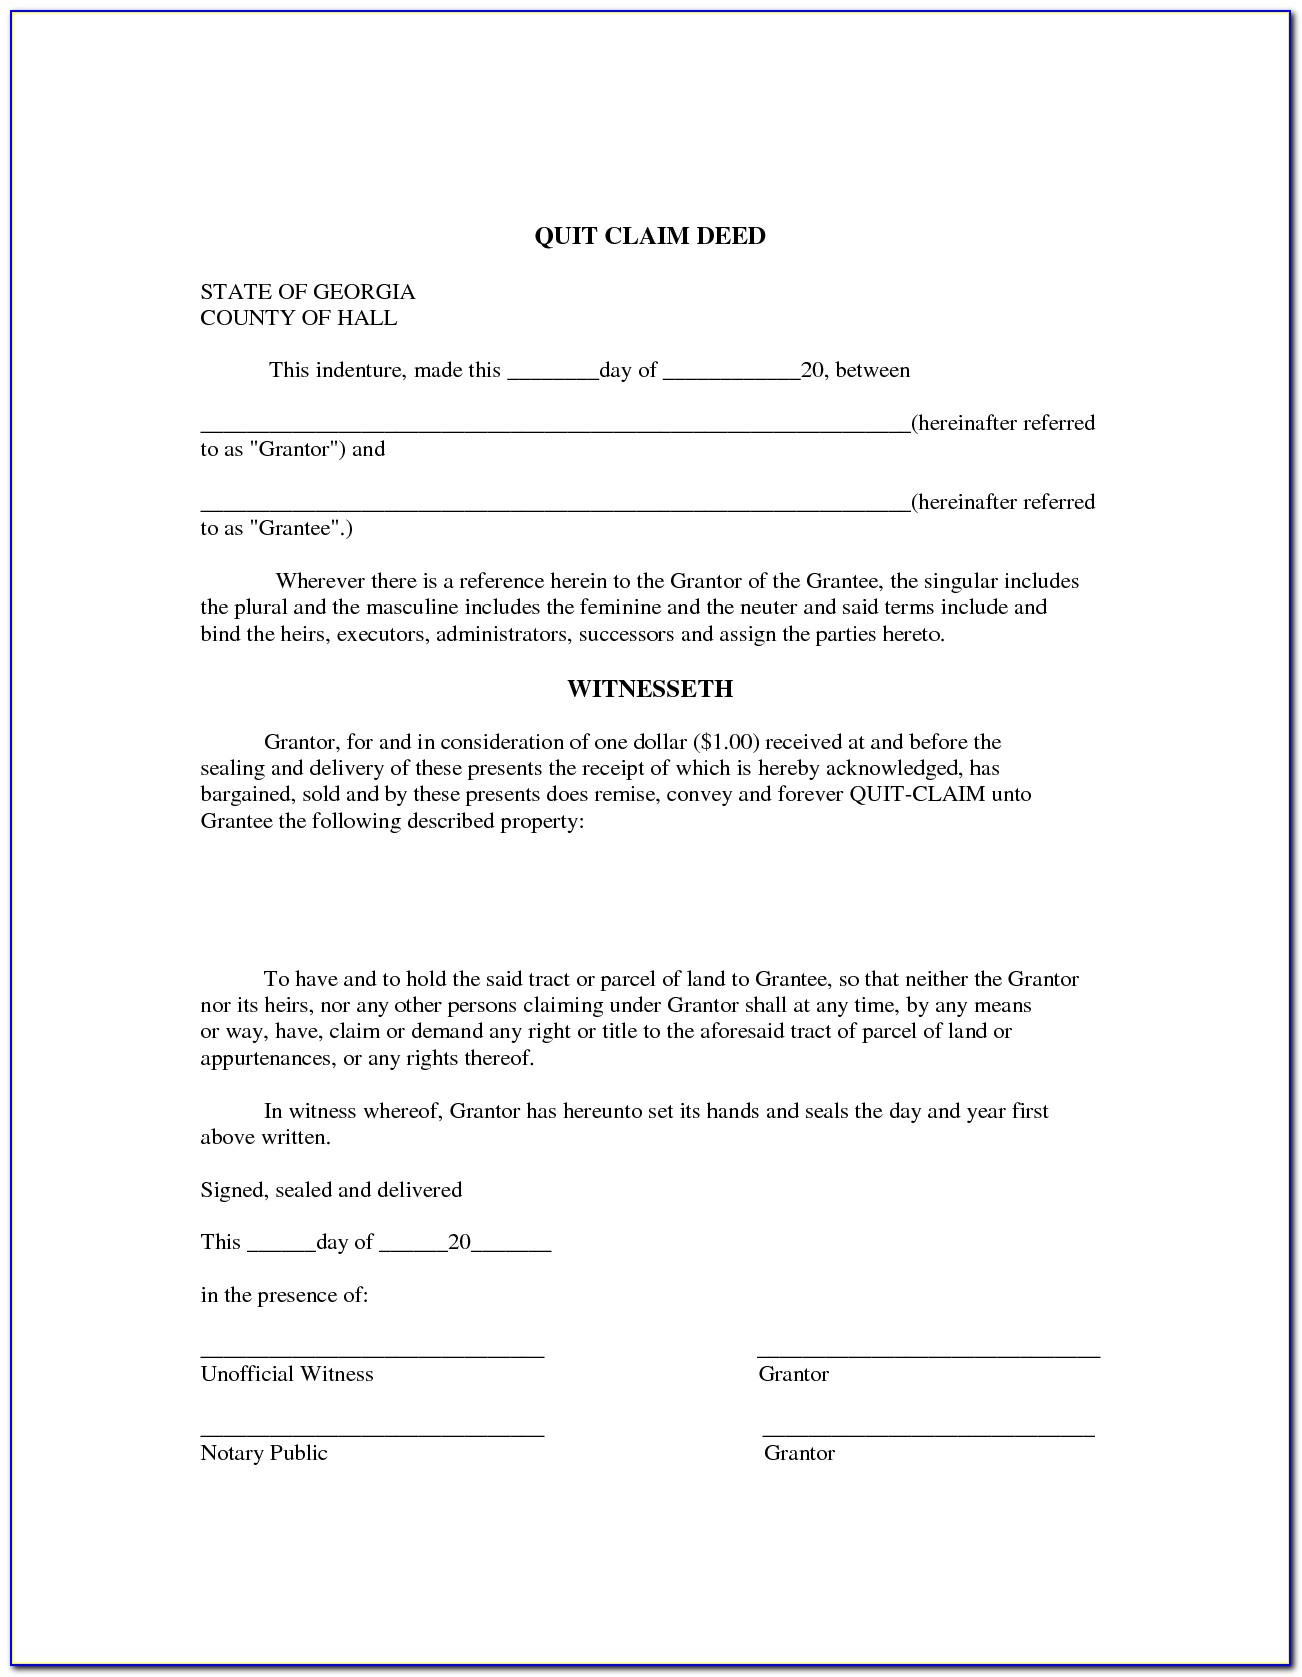 Free Printable Quit Claim Deed Form | Business Form Templates Regarding Free Printable Quit Claim Deed Form